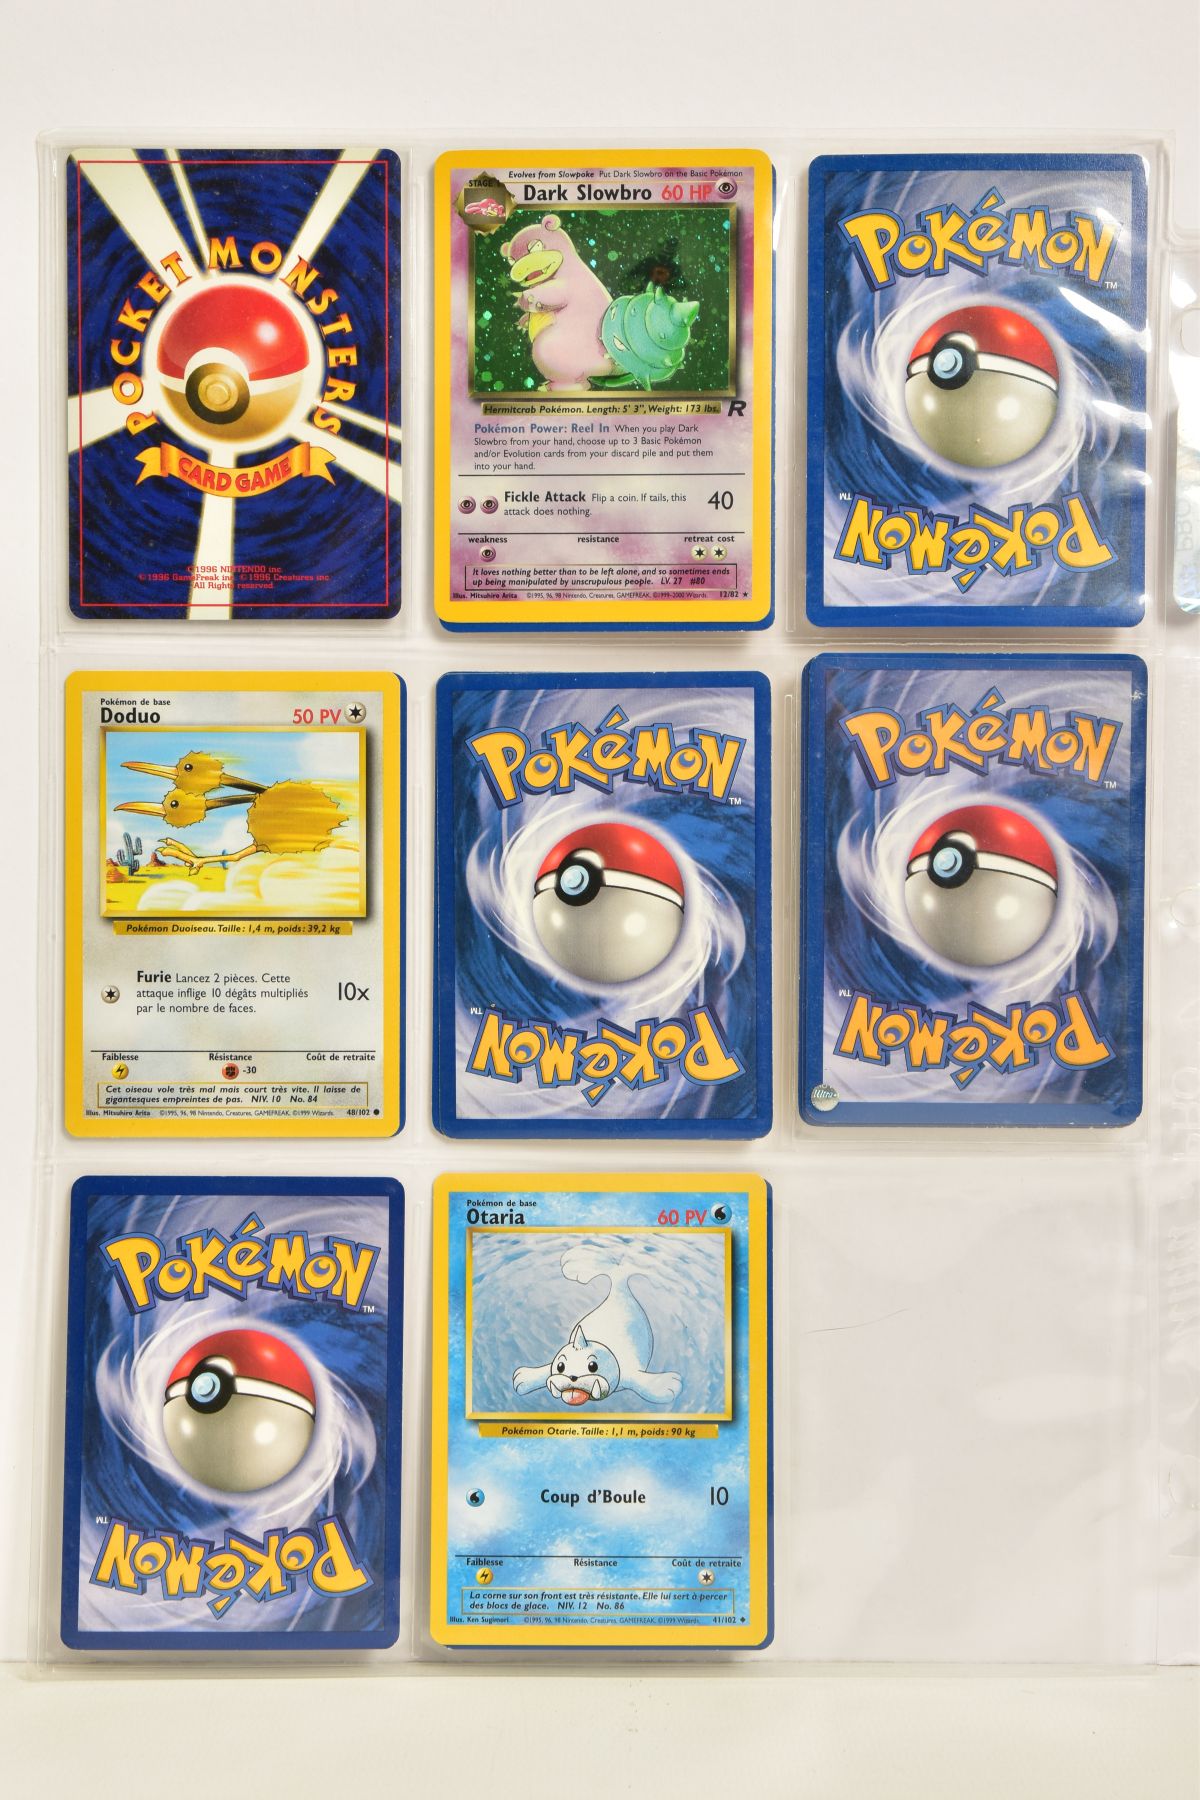 A QUANTITY OF POKEMON TCG CARDS, cards are assorted from Base Set, Base Set 2, Jungle, Fossil, - Image 21 of 46